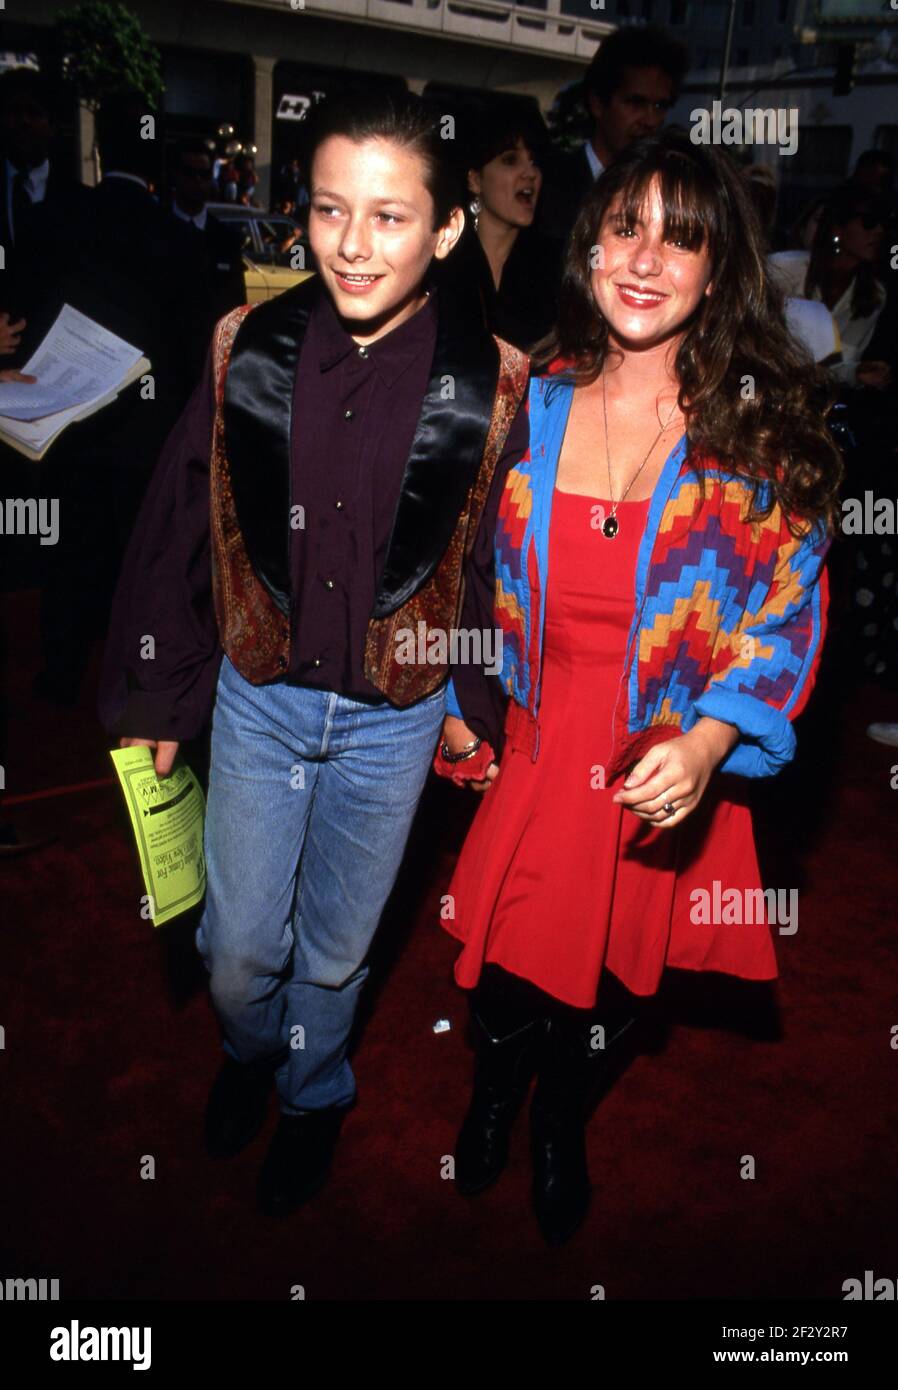 Edward Furlong and Soleil Moon Frye attend the 'Bill and Ted's Bogus Journey' Hollywood Premiere on July 11, 1991 at Mann's Chinese Theatre in Hollywood, California. Credit: Ralph Dominguez/MediaPunch Stock Photo